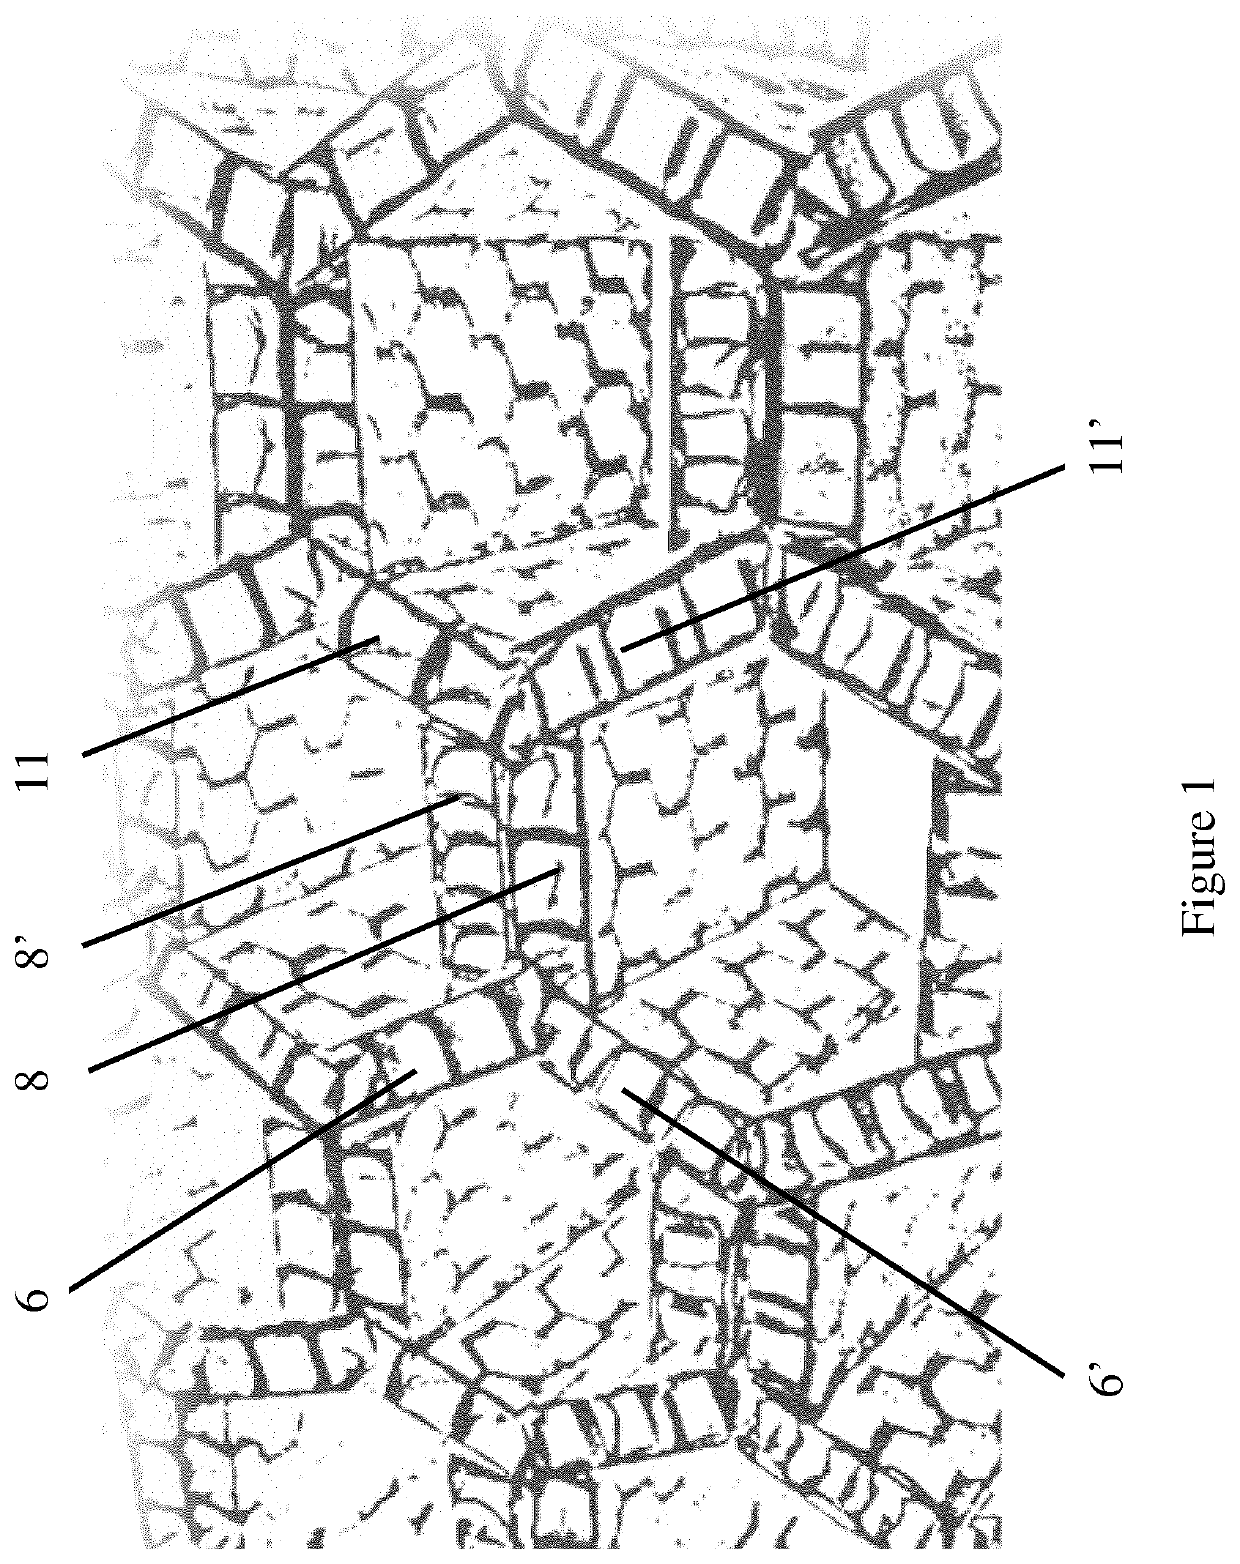 Honeycomb core with hierarchical cellular structure